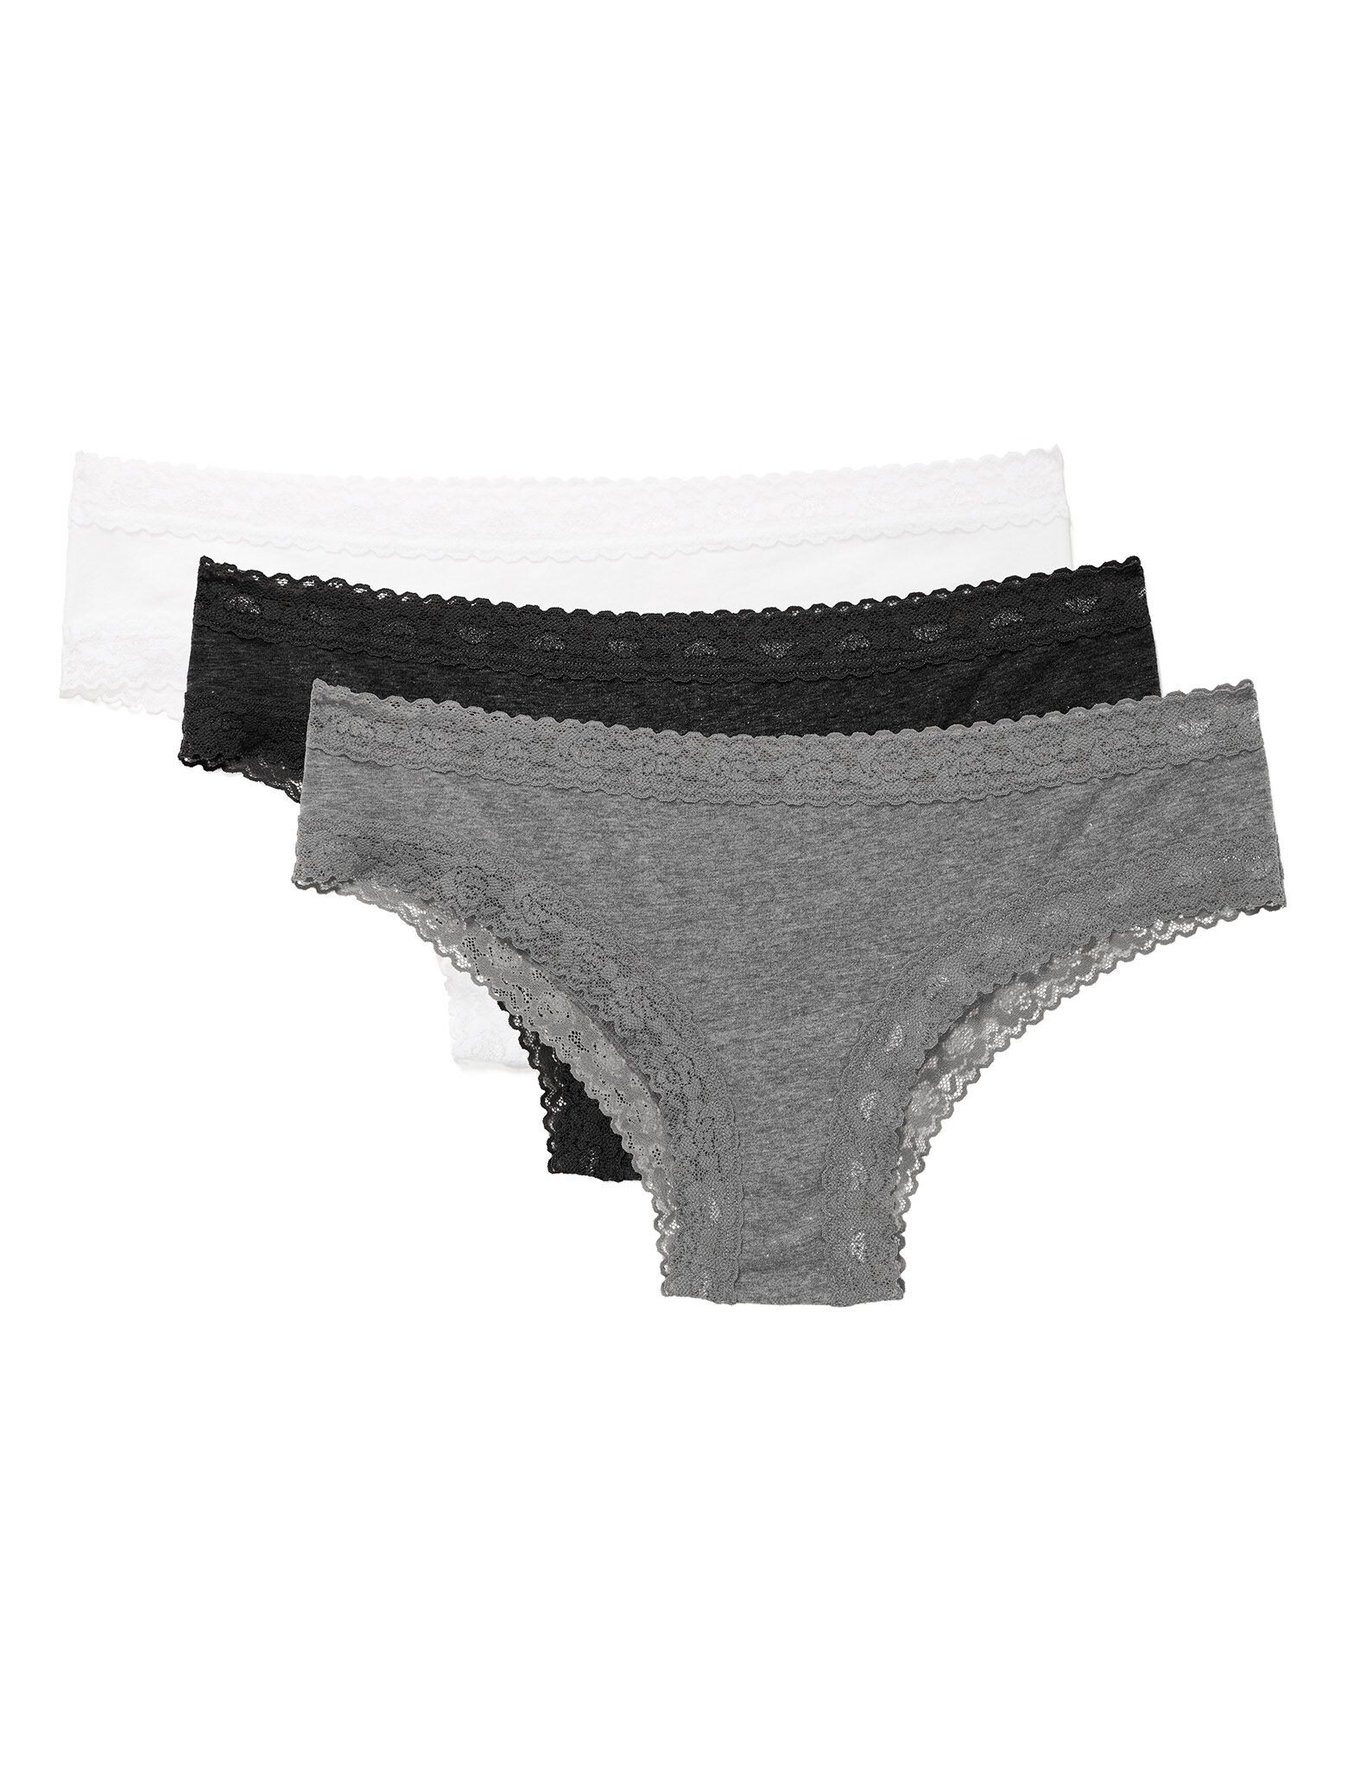 Sexy Basics Women's 12 Pack Cotton Brief Soft Underwear  Full Coverage Panty  Briefs -Assorted Colors & Prints (12 Pack - Grab Bag of Solids & Prints,  Medium) at  Women's Clothing store